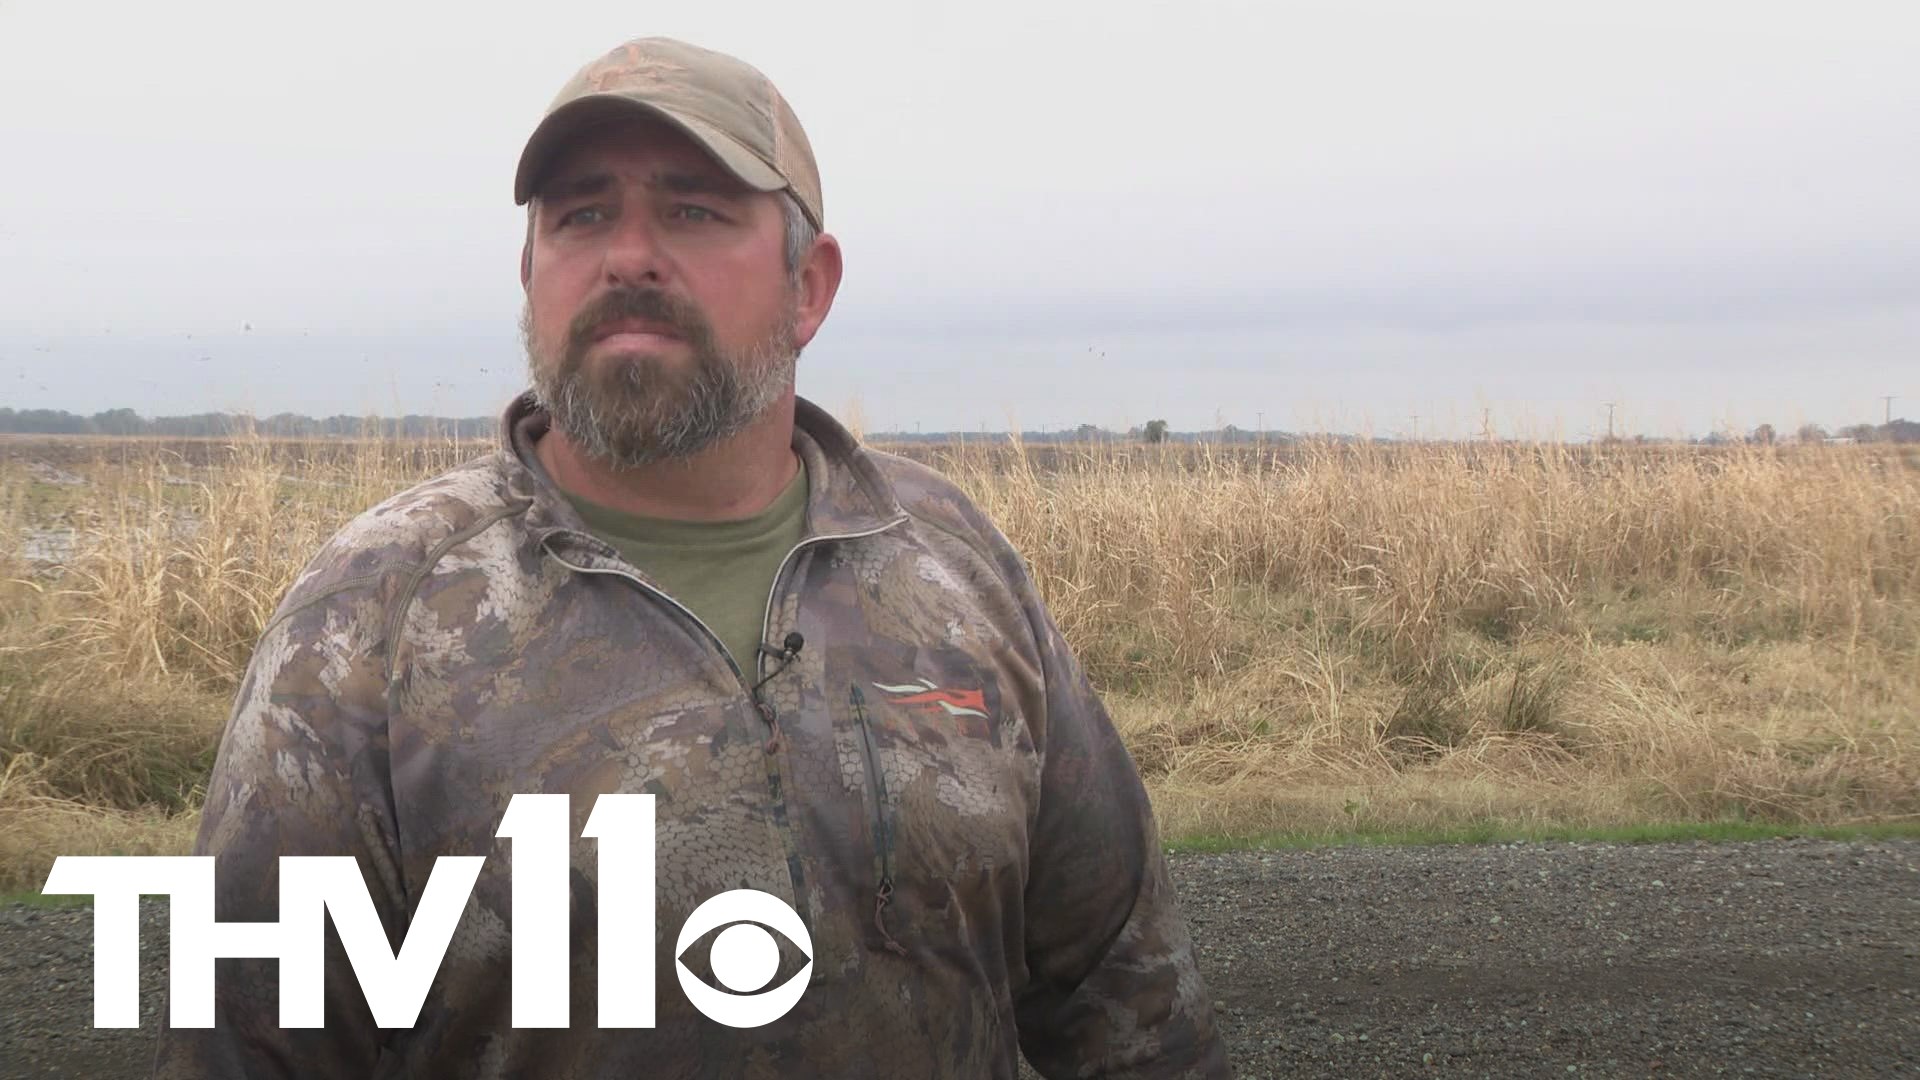 Last weekend's rain was welcomed news for farmers and waterfowl hunters. We're about two weeks out from duck season, and hunters say the rain helps them save money.